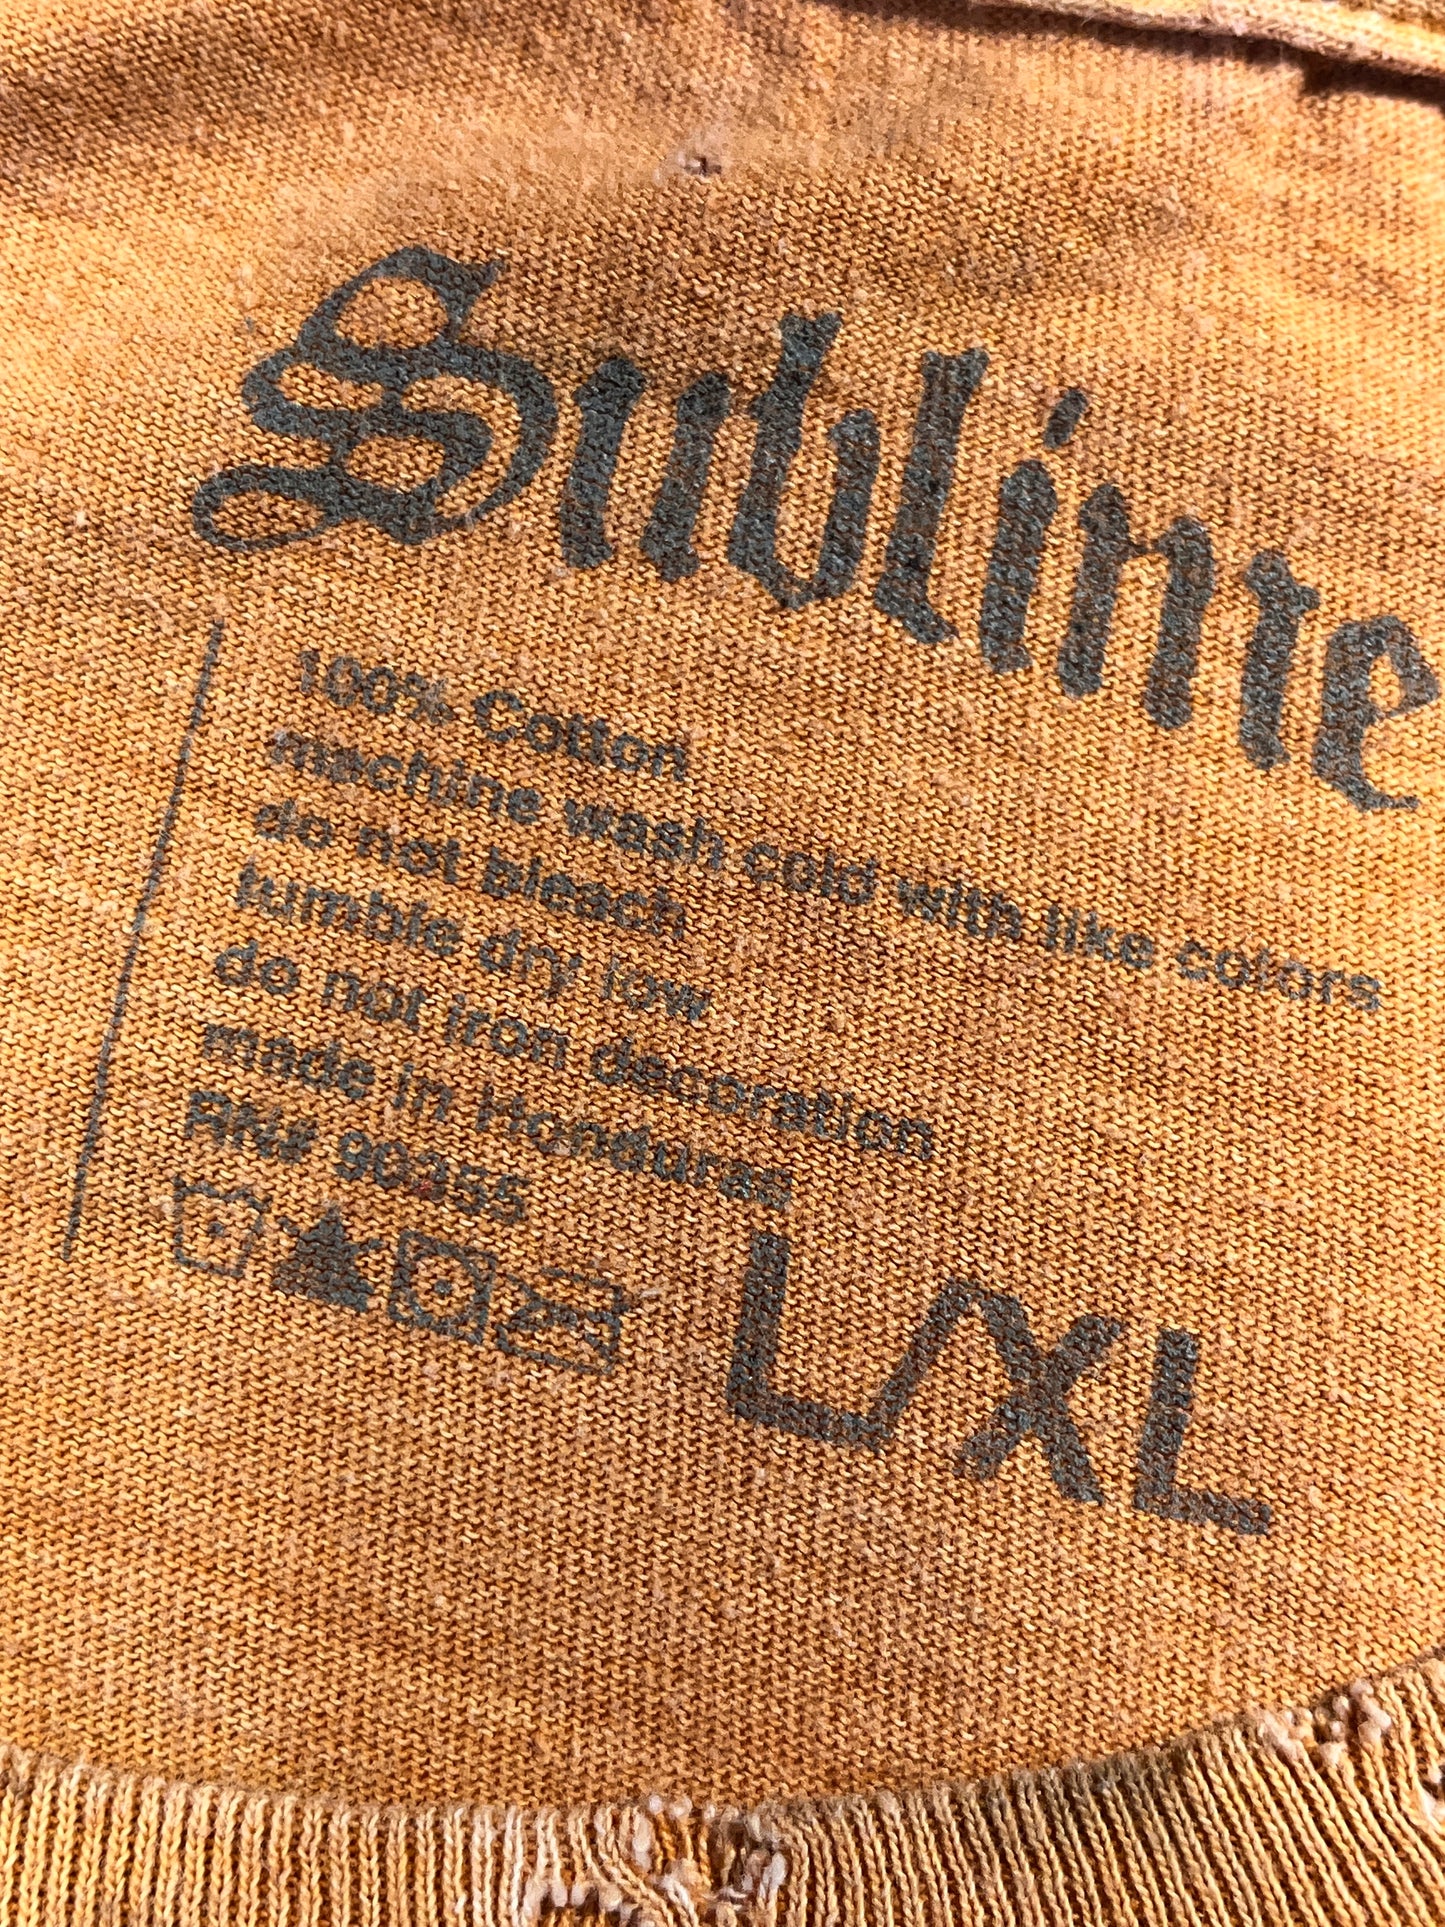 Vintage Sublime T-Shirt Band Long Beach Graphic Tee